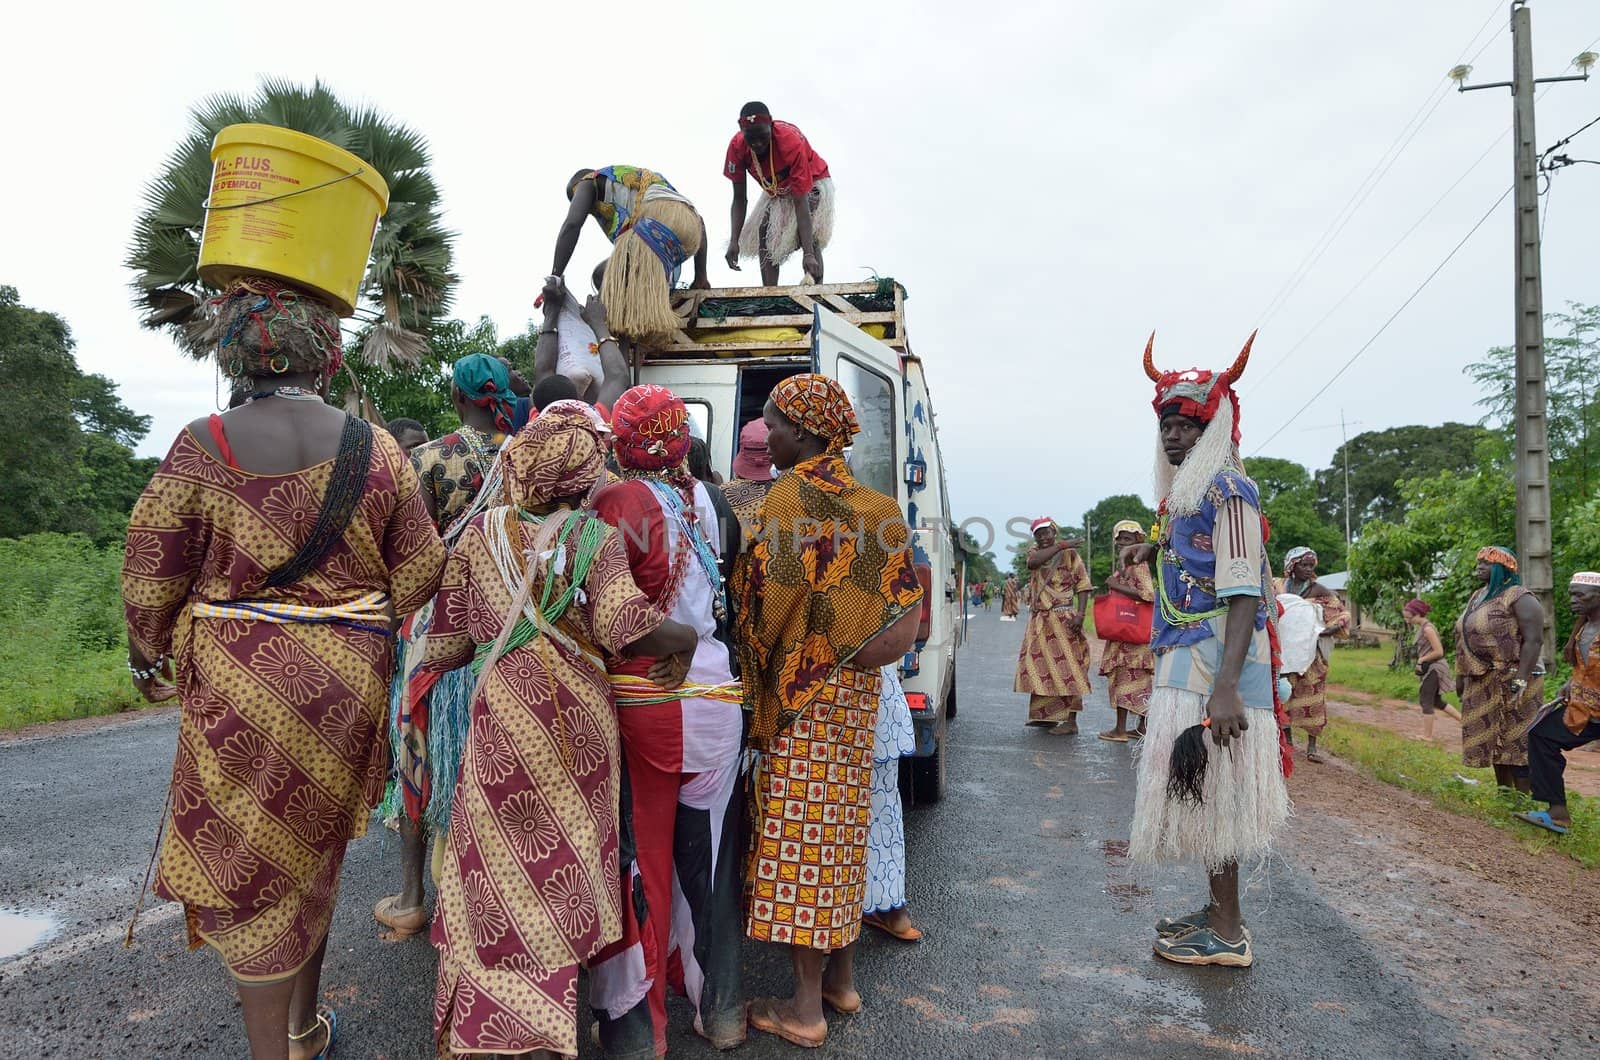 Kartiak,Senegal-September 18,2012 :people on the road go to a ritual of Boukoutt of Initiation ceremony on Sept 18,2012 in Kartiak, Senegal.The ceremony occurs every 30 years and celebrates boys becoming men.